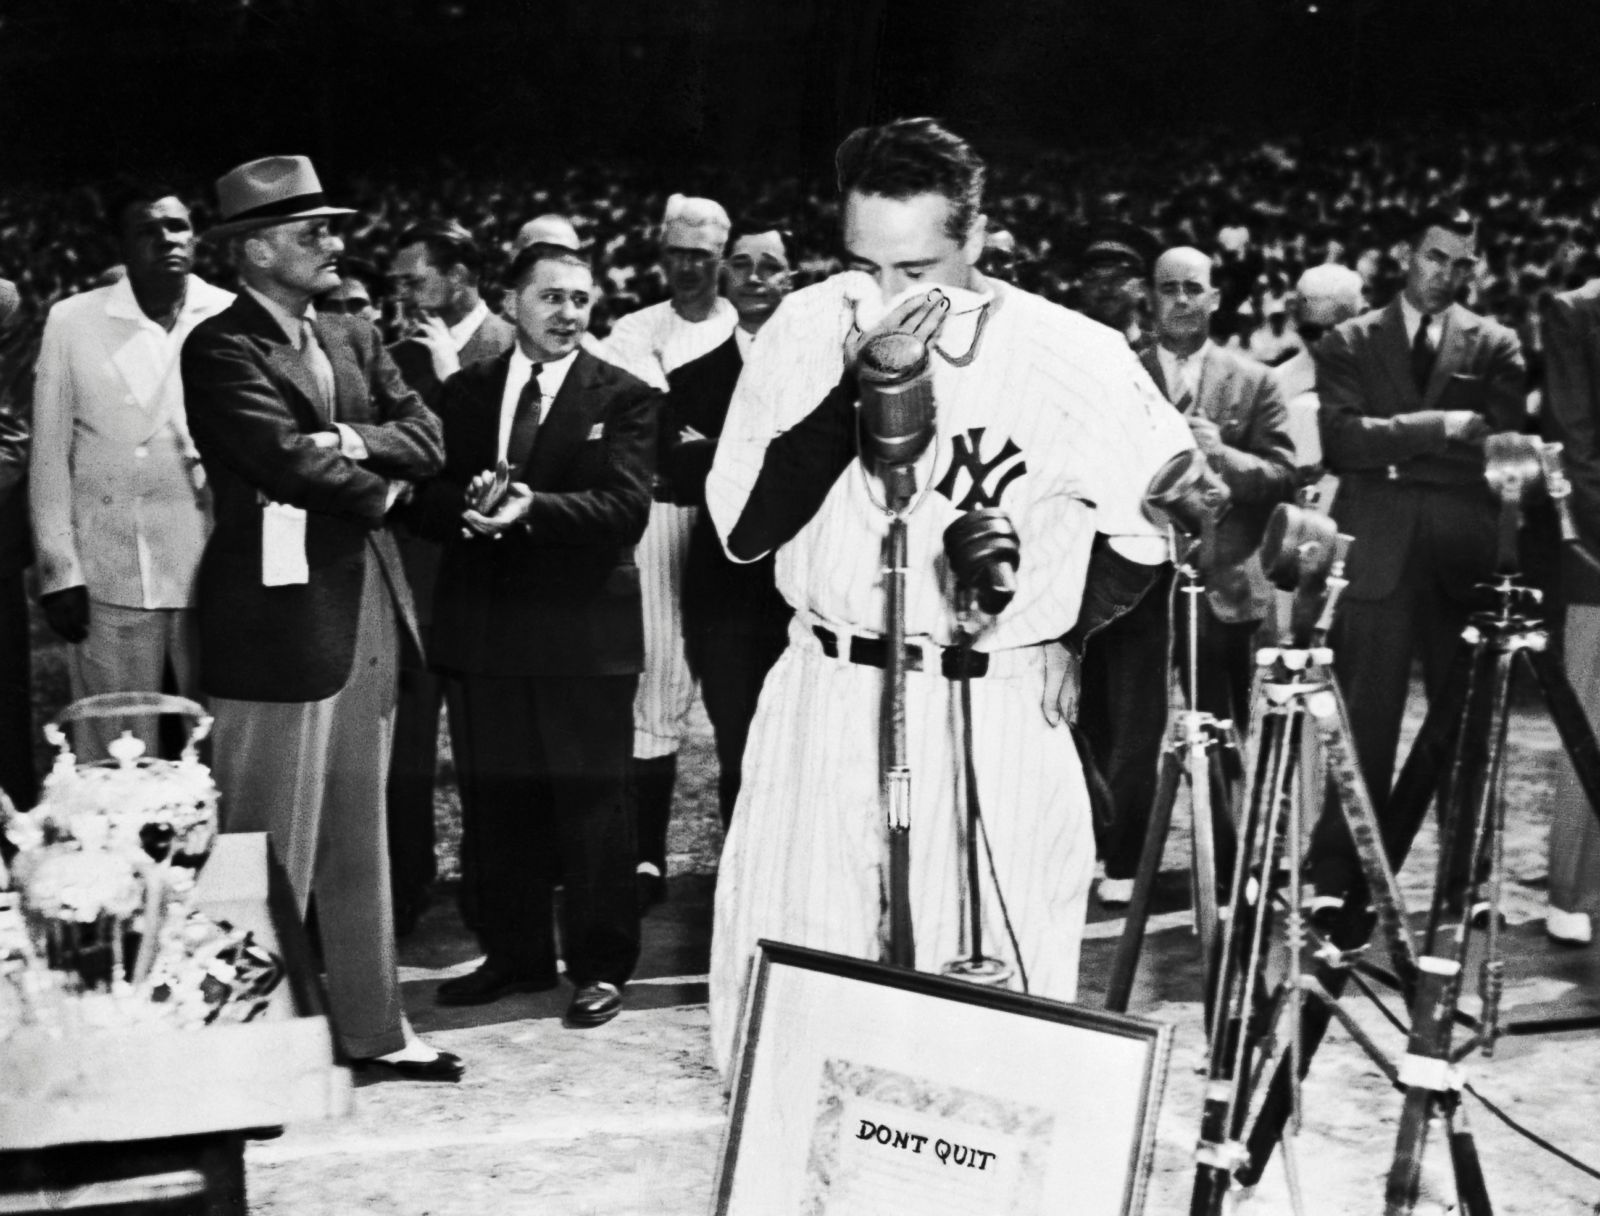 July 4, 1939 Will Forever Be Known as Lou Gehrig Appreciation Day.